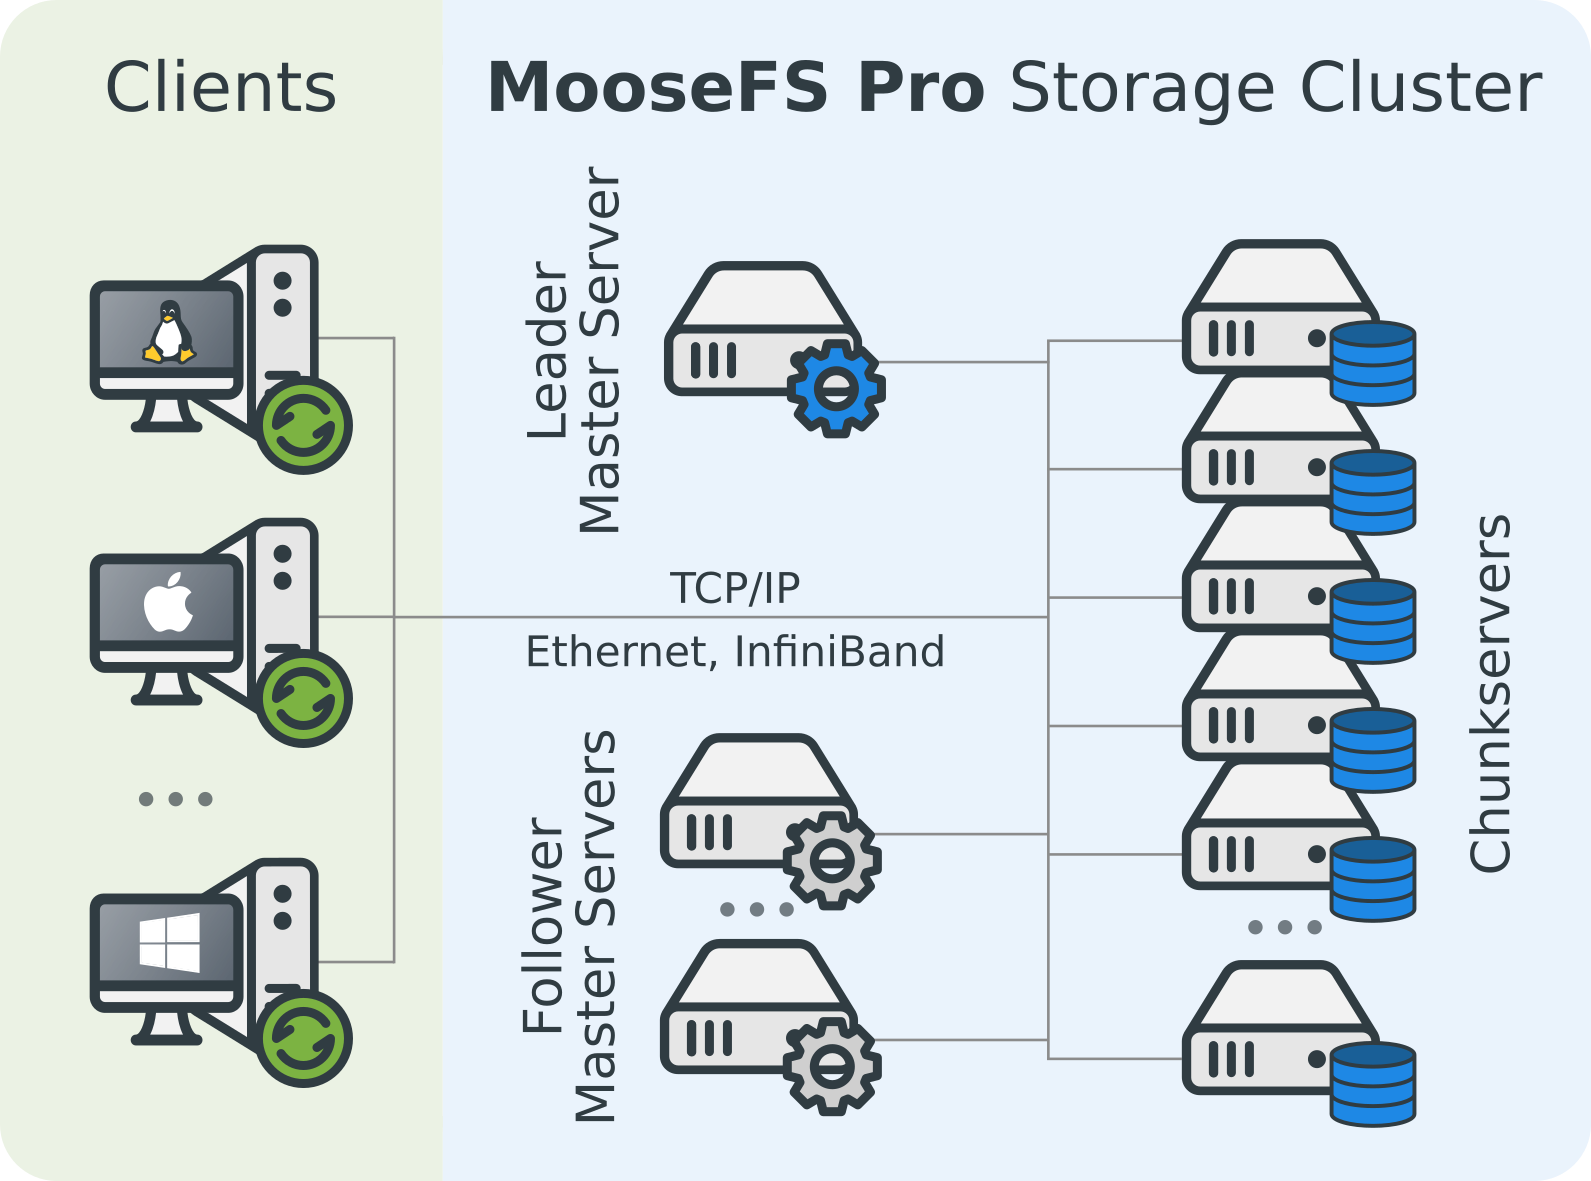 Distributed file system architecture – MooseFS